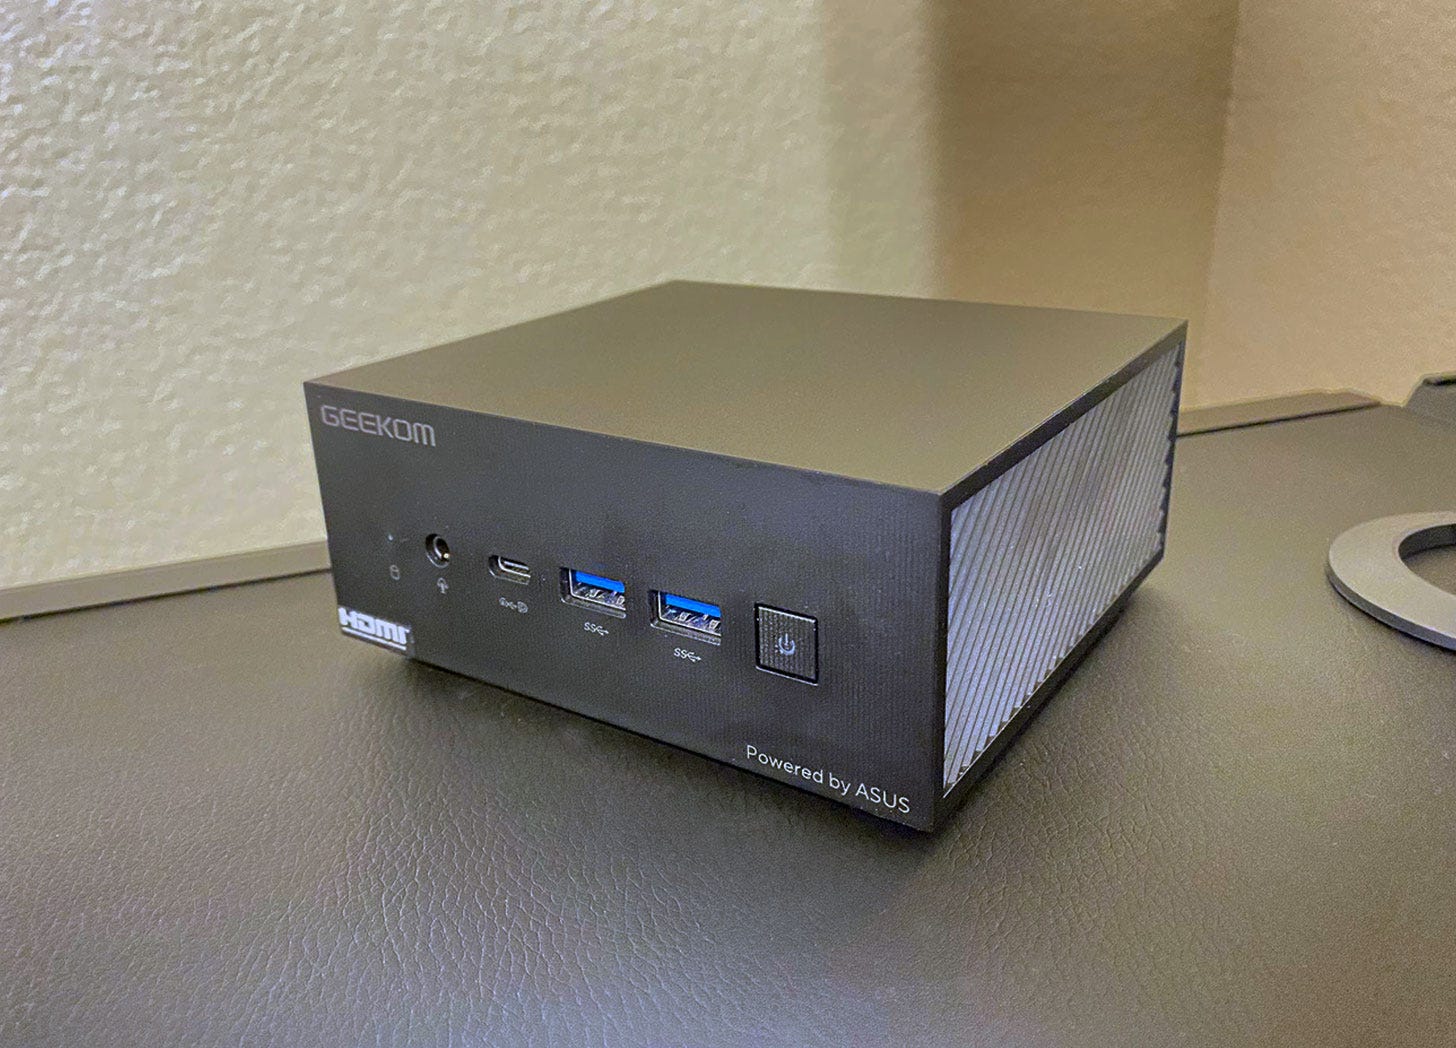 GEEKOM PC reviews AS 6 mini PC, Mark LoProto posted on the topic